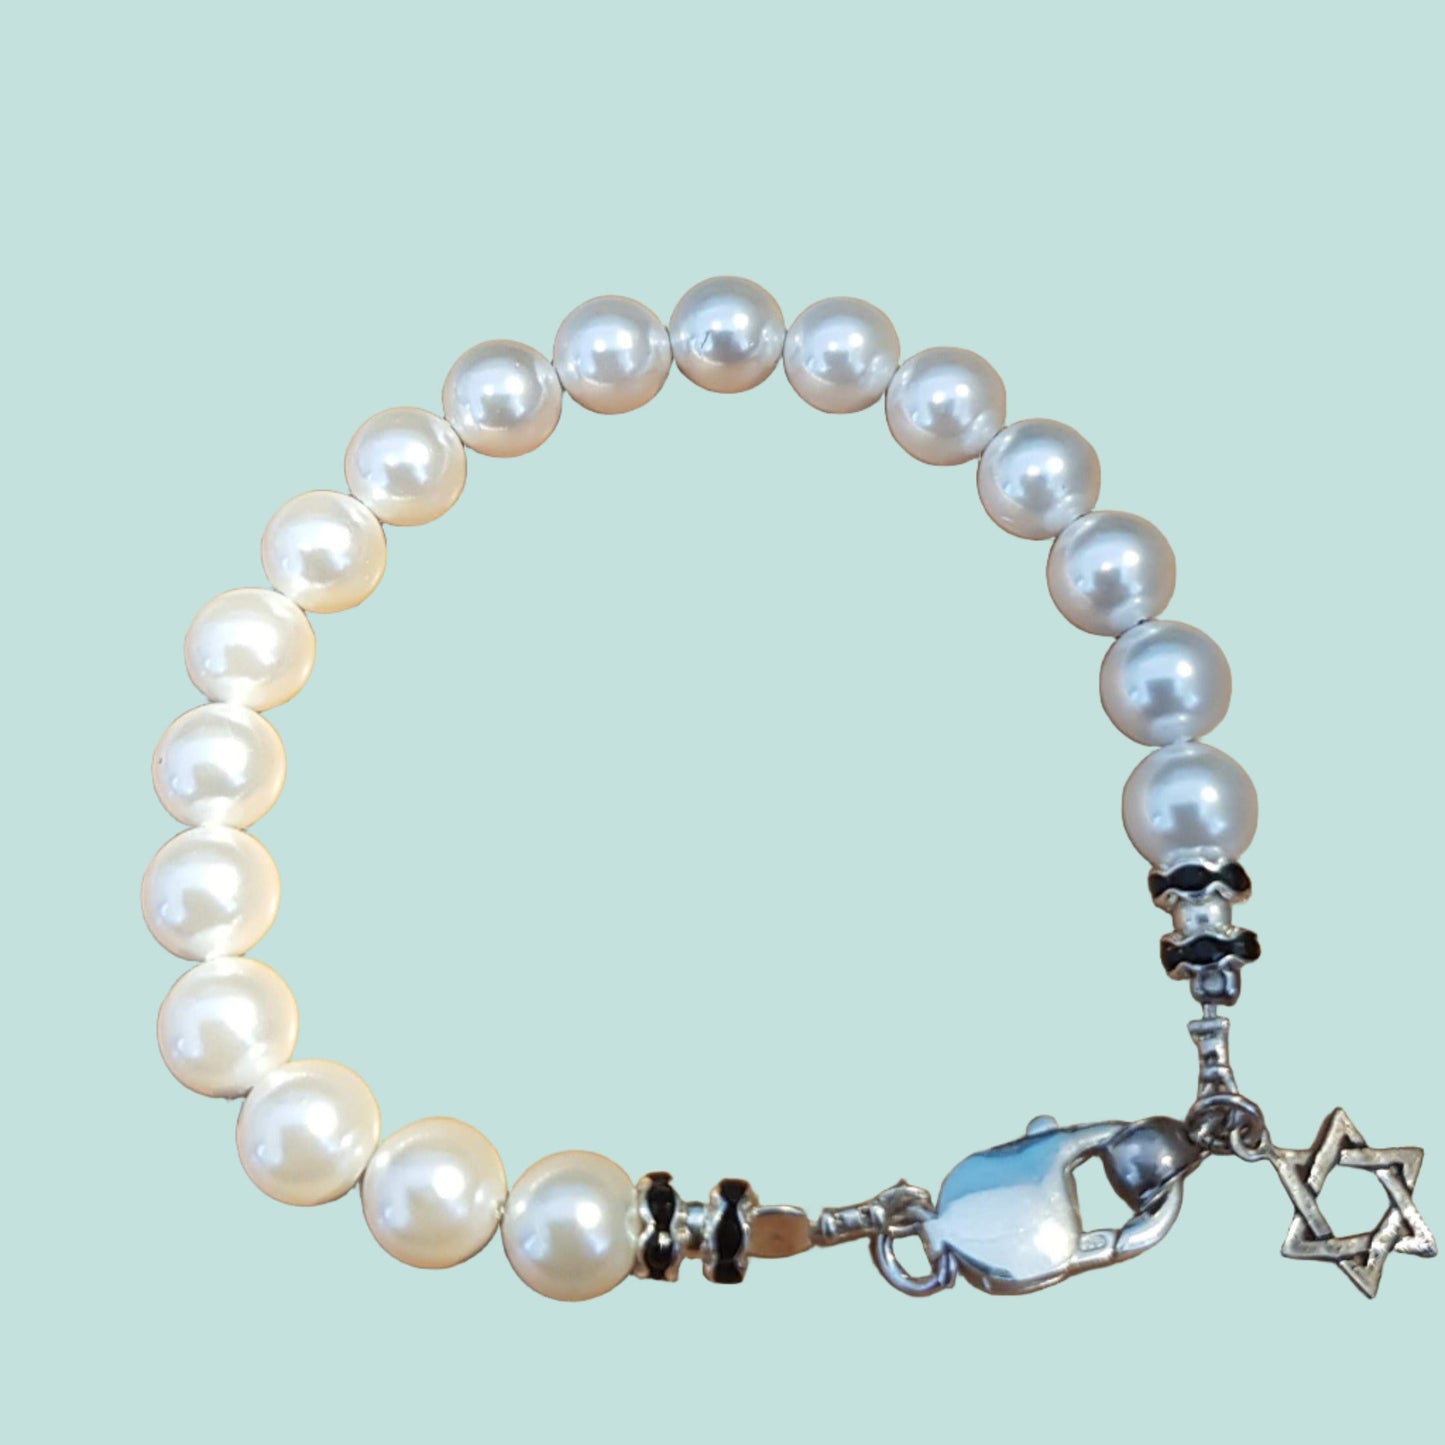 Bluenoemi Jewelry Bracelets white Pearls bracelet Star of David charms for peace protection & good luck